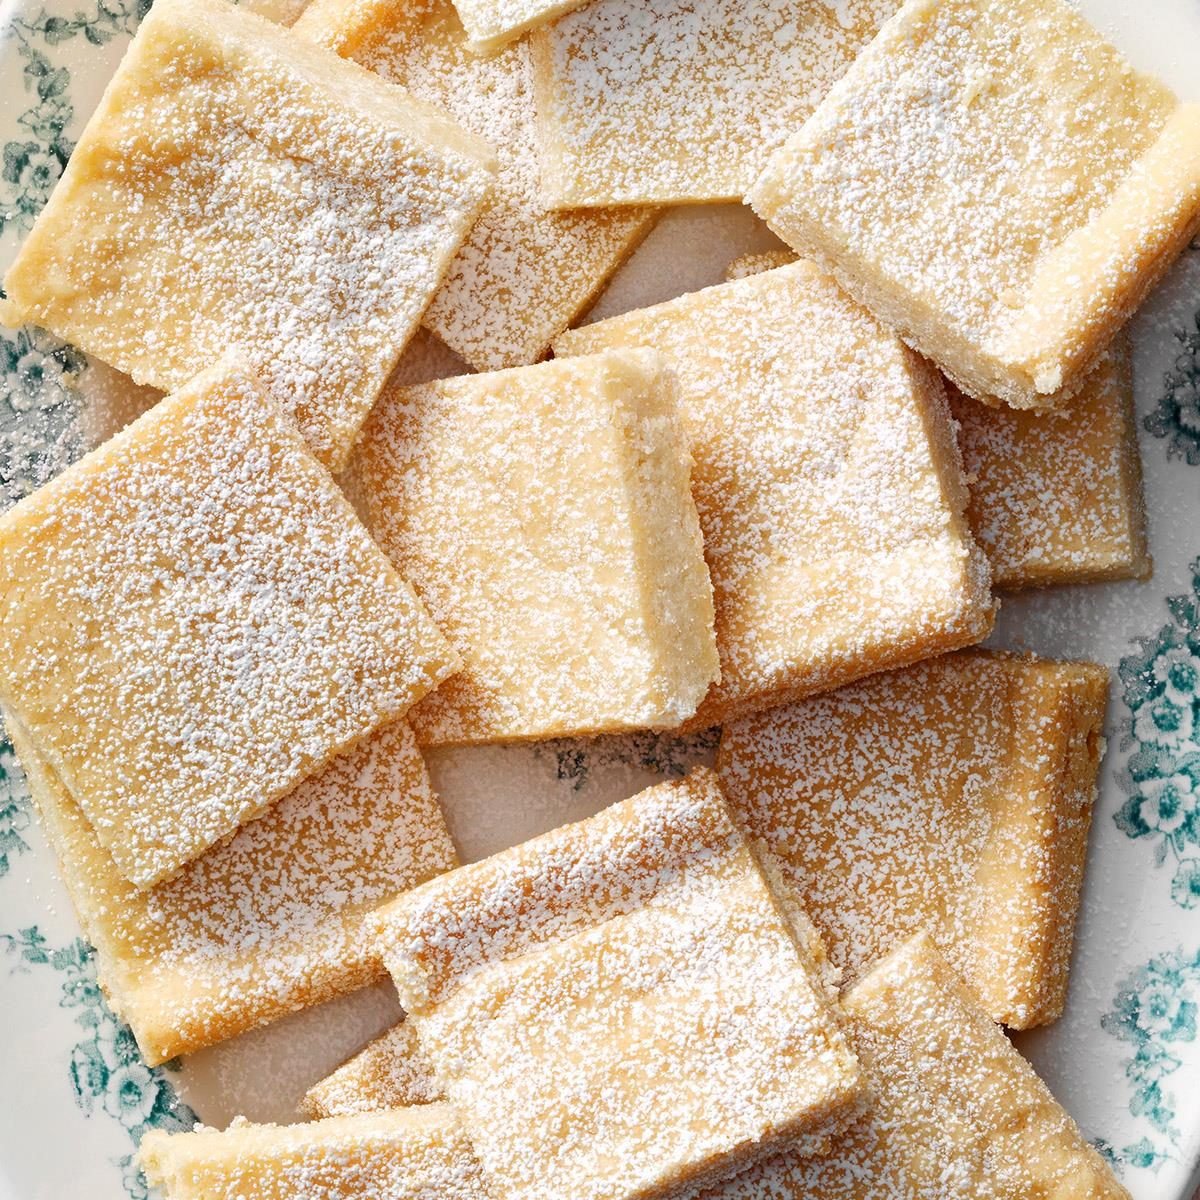 https://www.tasteofhome.com/wp-content/uploads/2018/01/Buttery-3-Ingredient-Shortbread-Cookies_EXPS_HCBZ22_77957_DR_04_26_1b.jpg